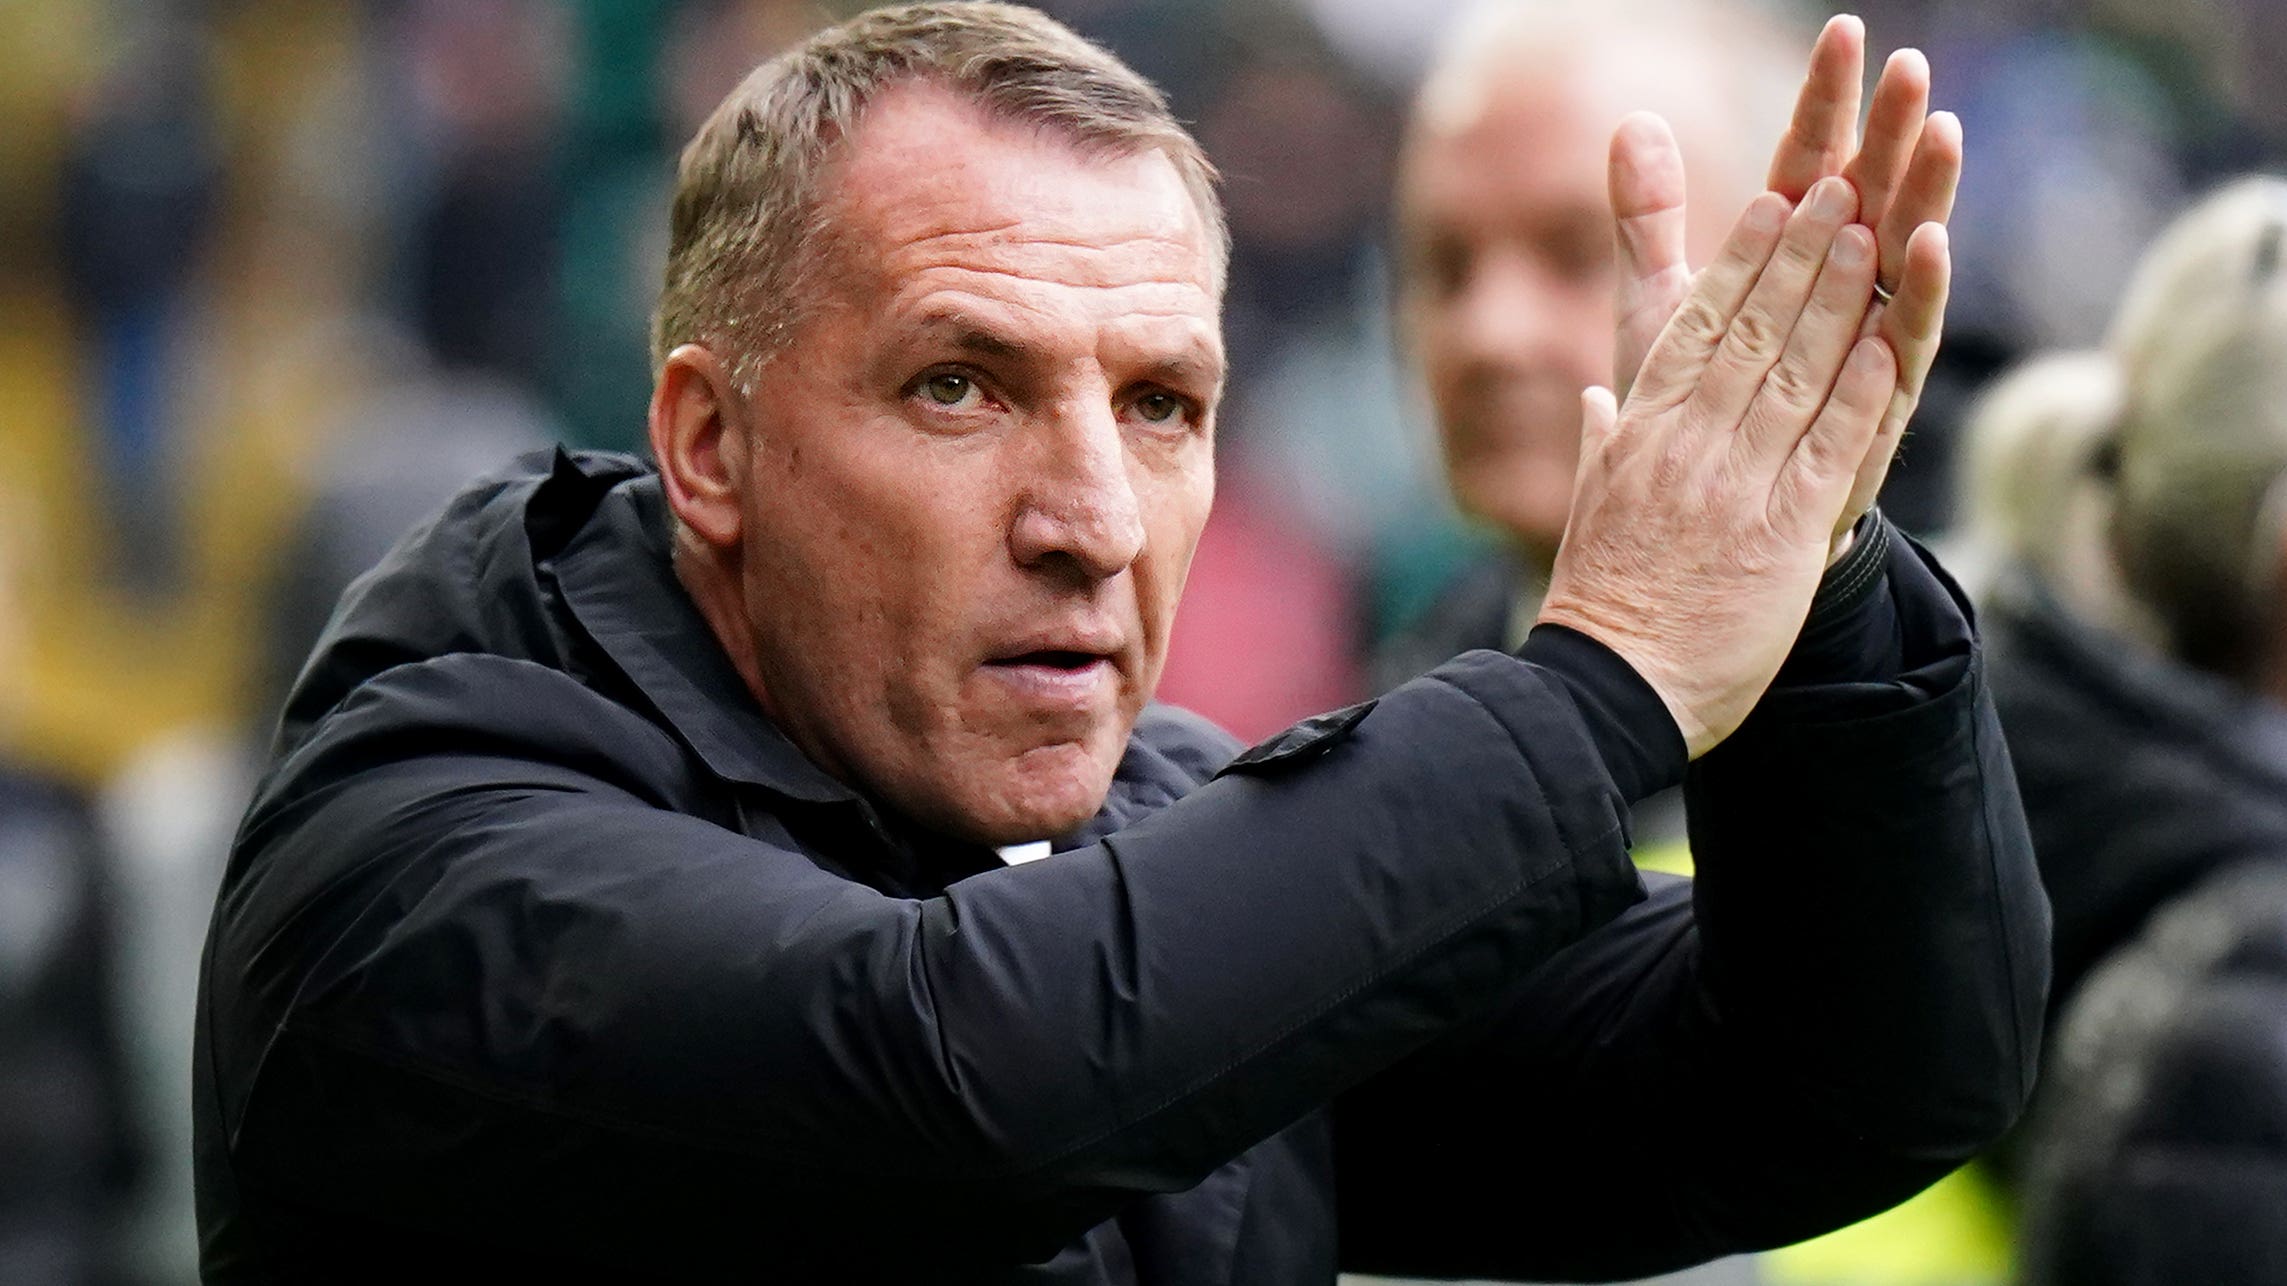 Brendan Rodgers hails Celtic’s mentality after win over Kilmarnock